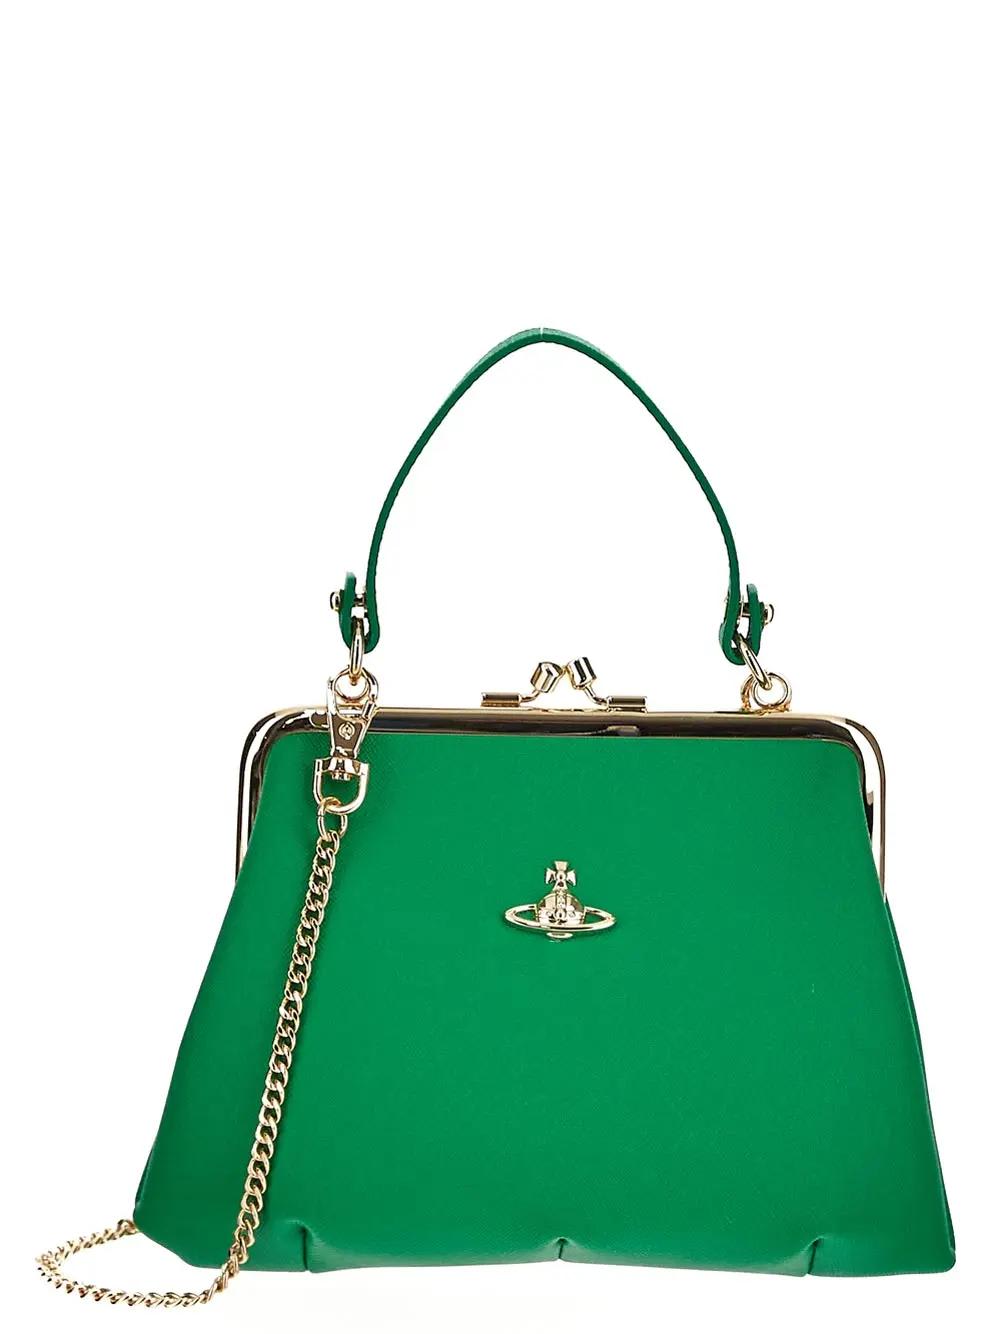 Vivienne Westwood Granny Purse In Bright Green